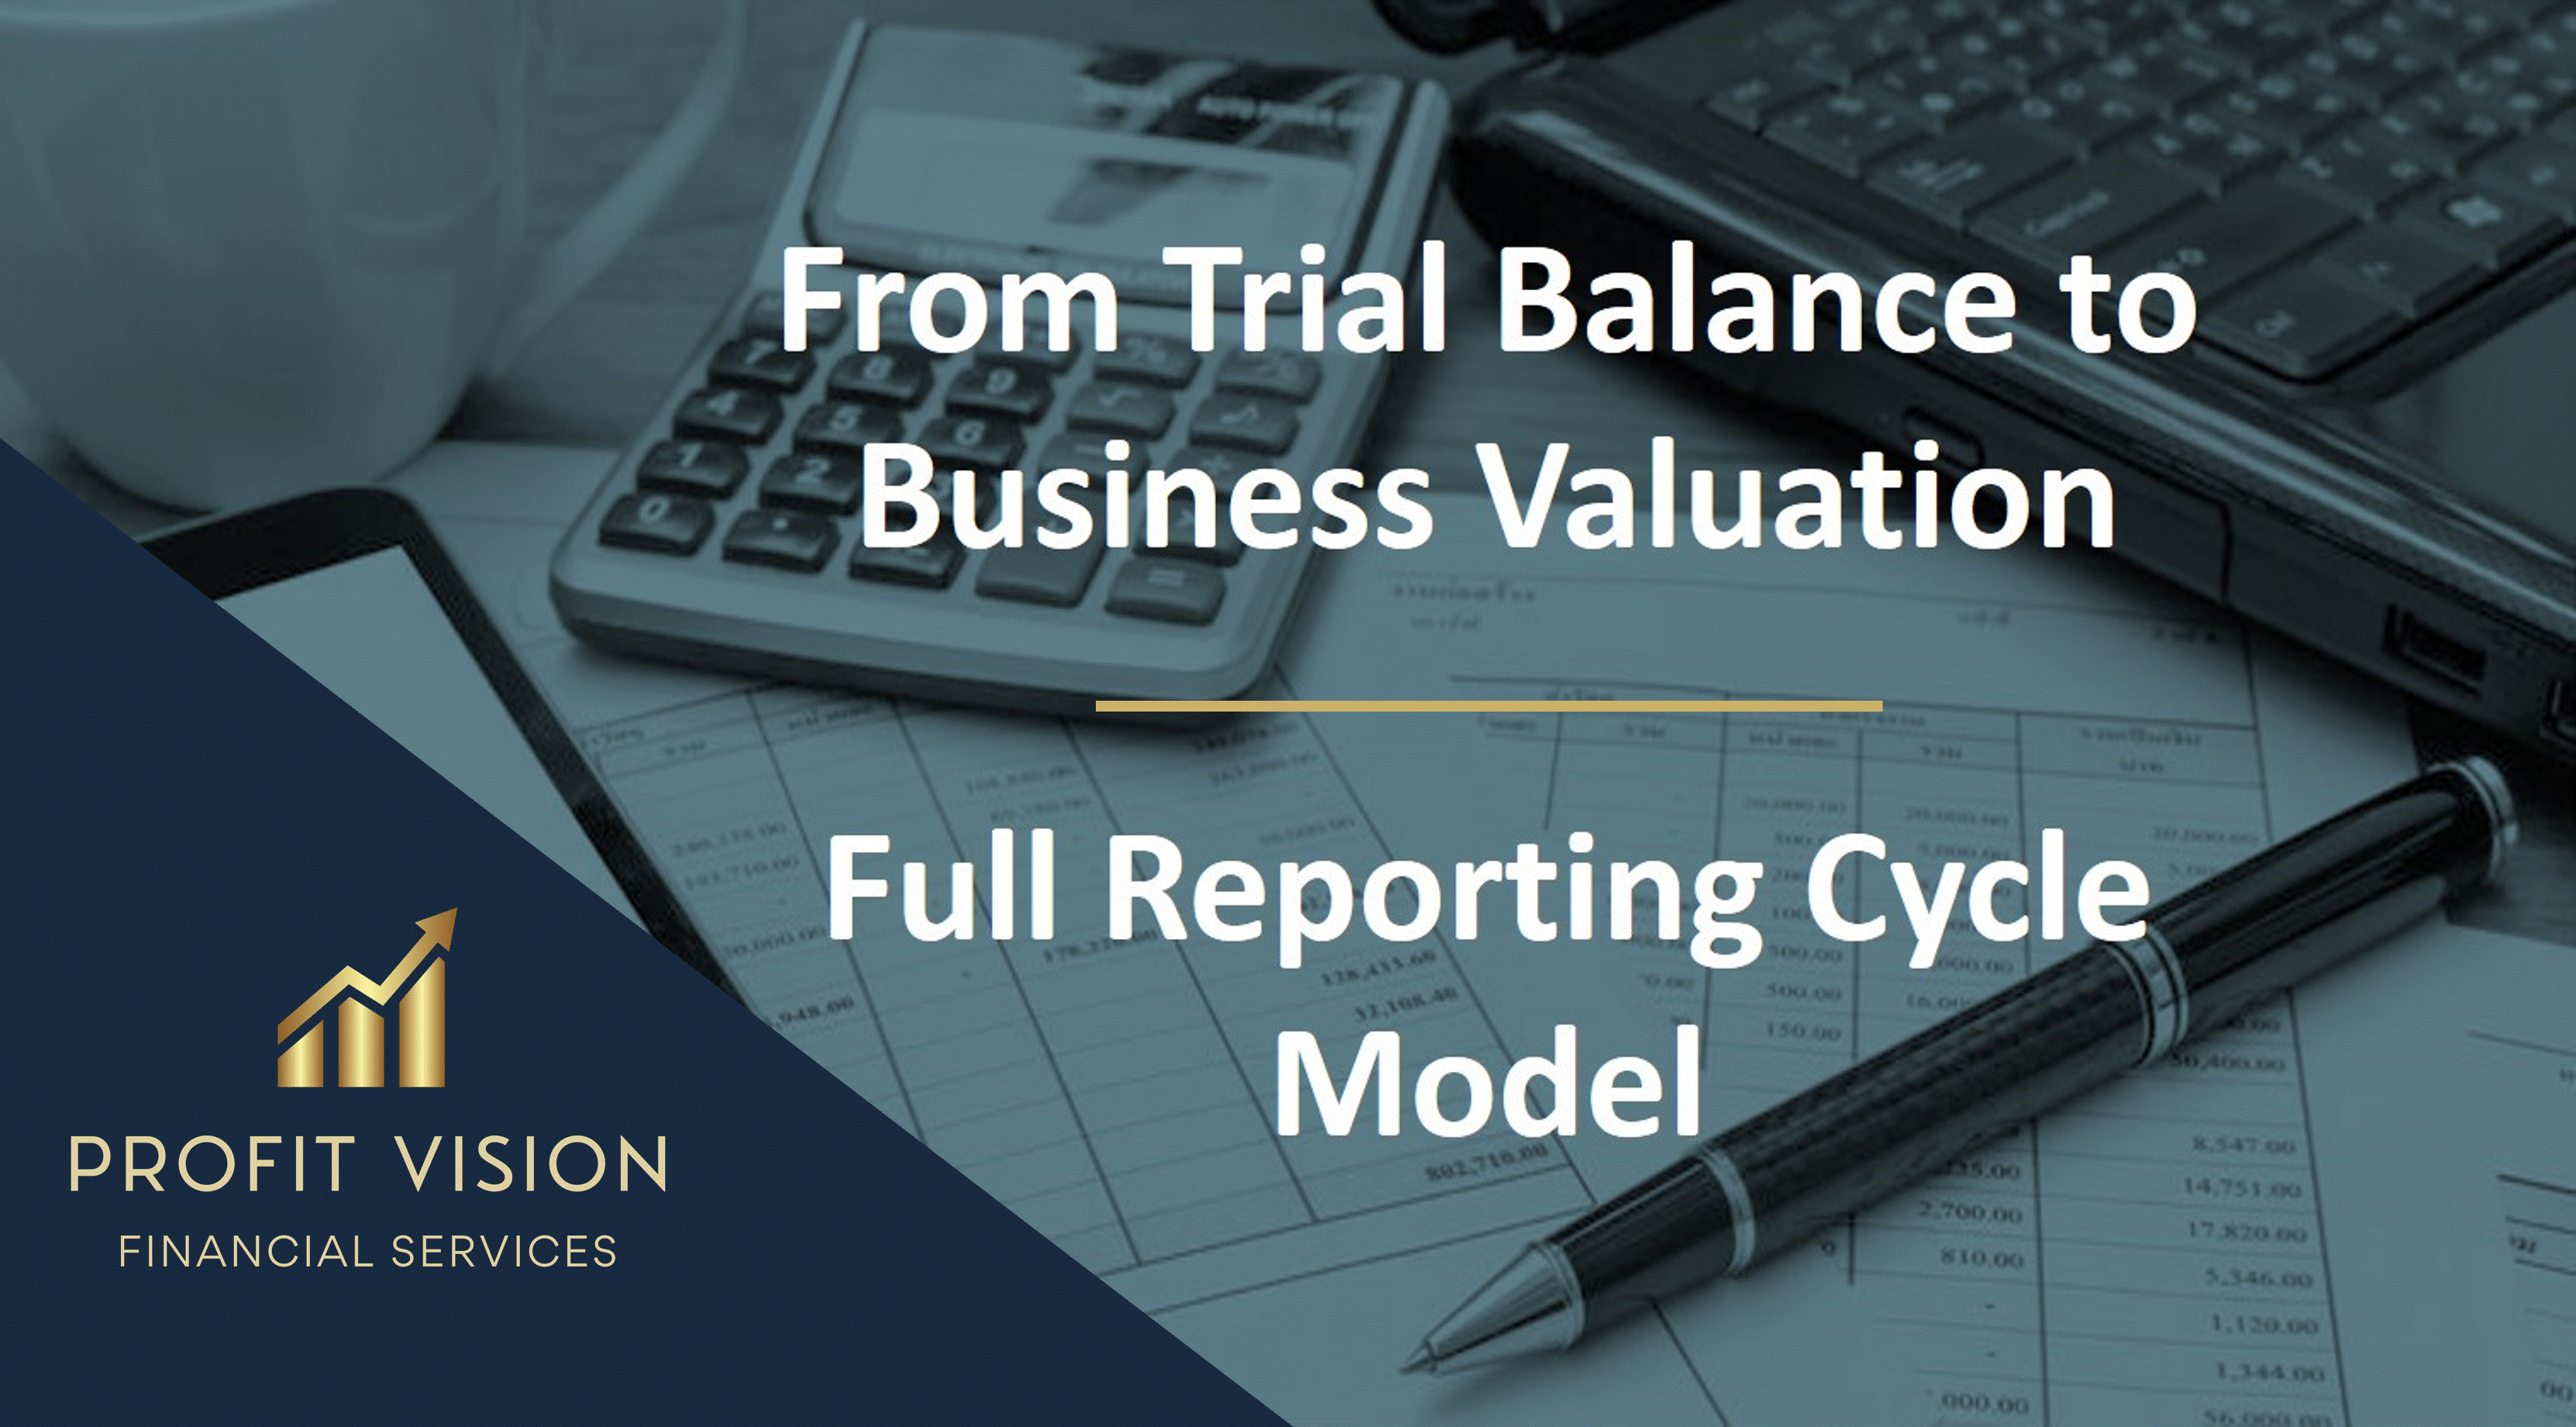 From Trial Balance to Business Valuation